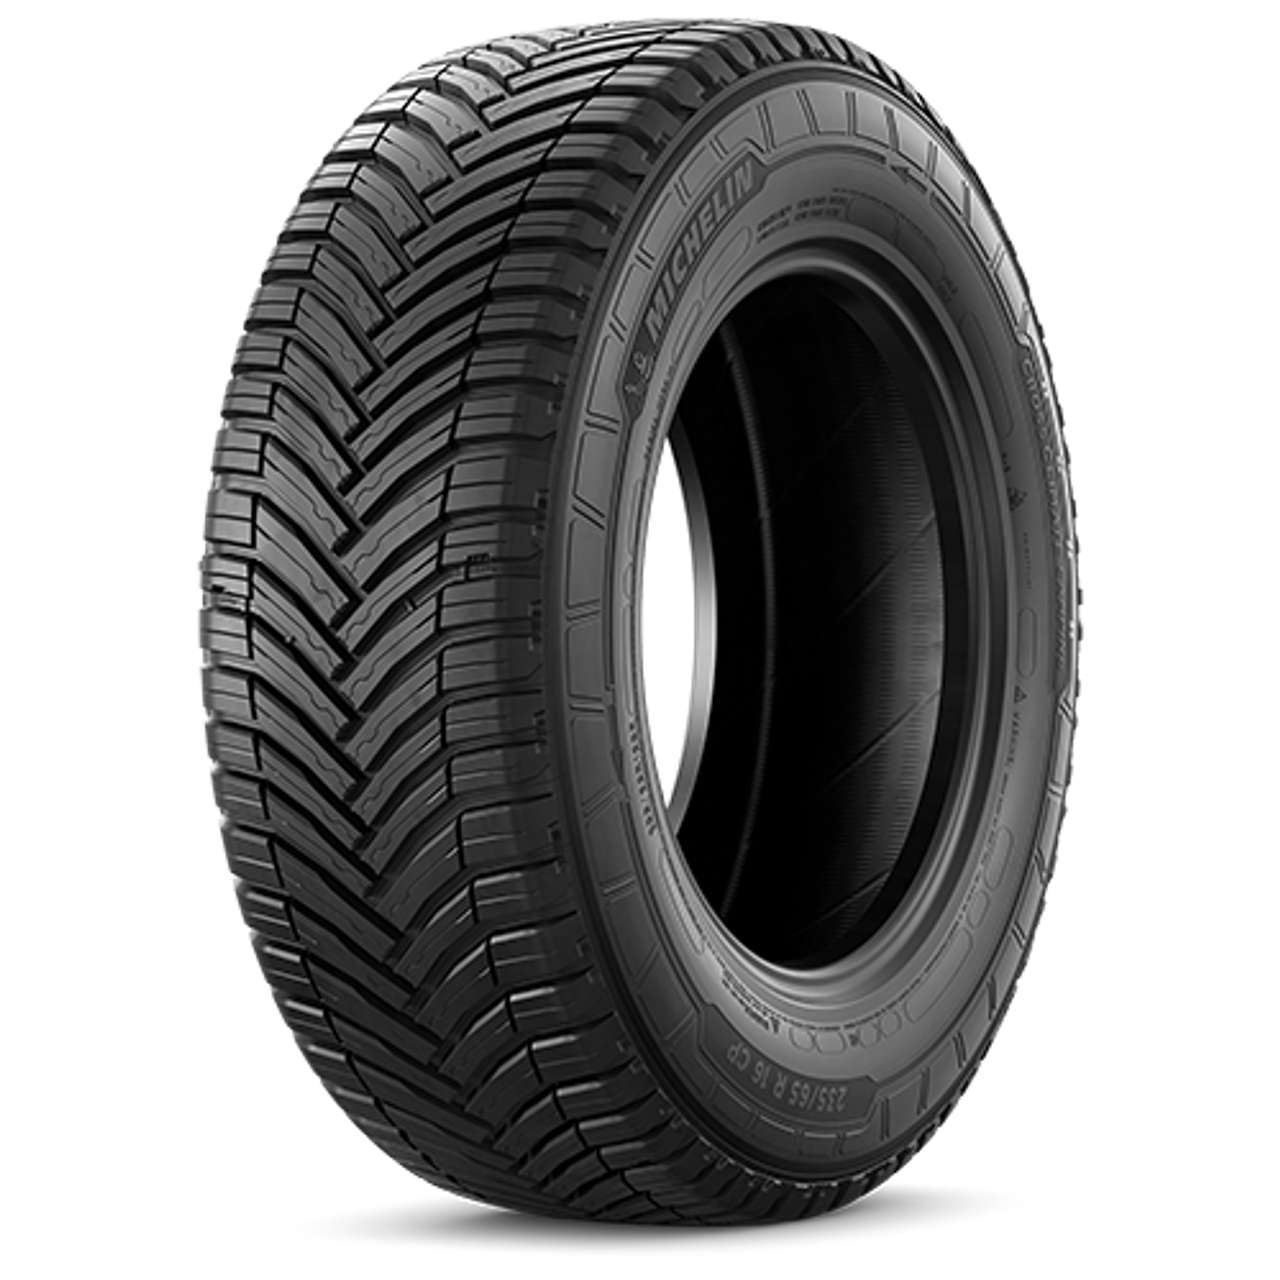 MICHELIN CROSSCLIMATE CAMPING 195/75R16 107R BSW